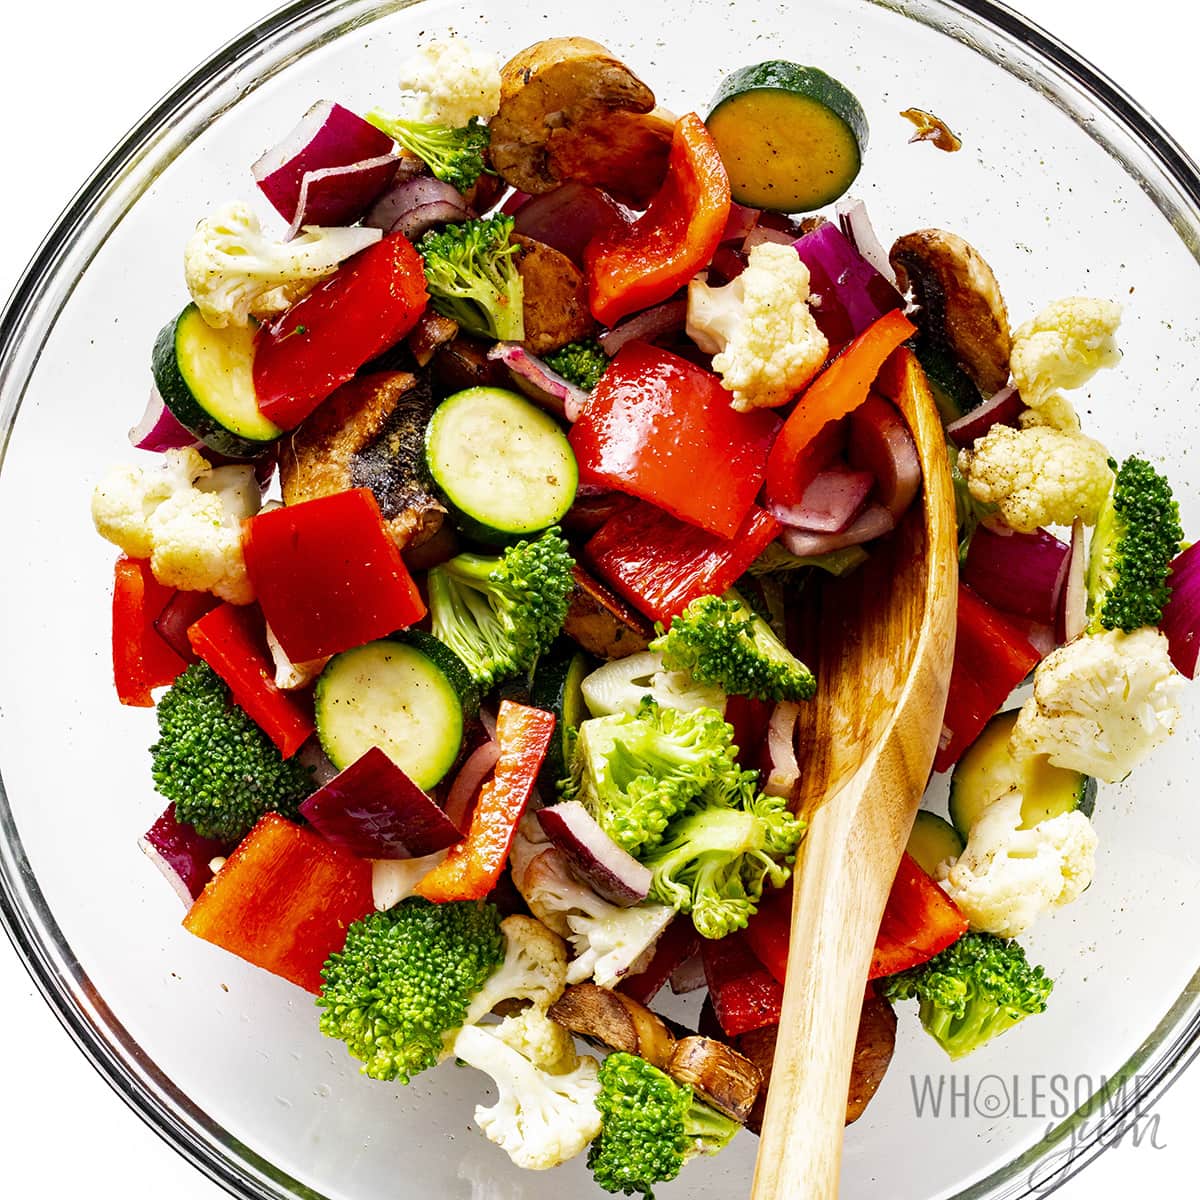 Veggies tossed in olive oil and seasoning in a bowl.